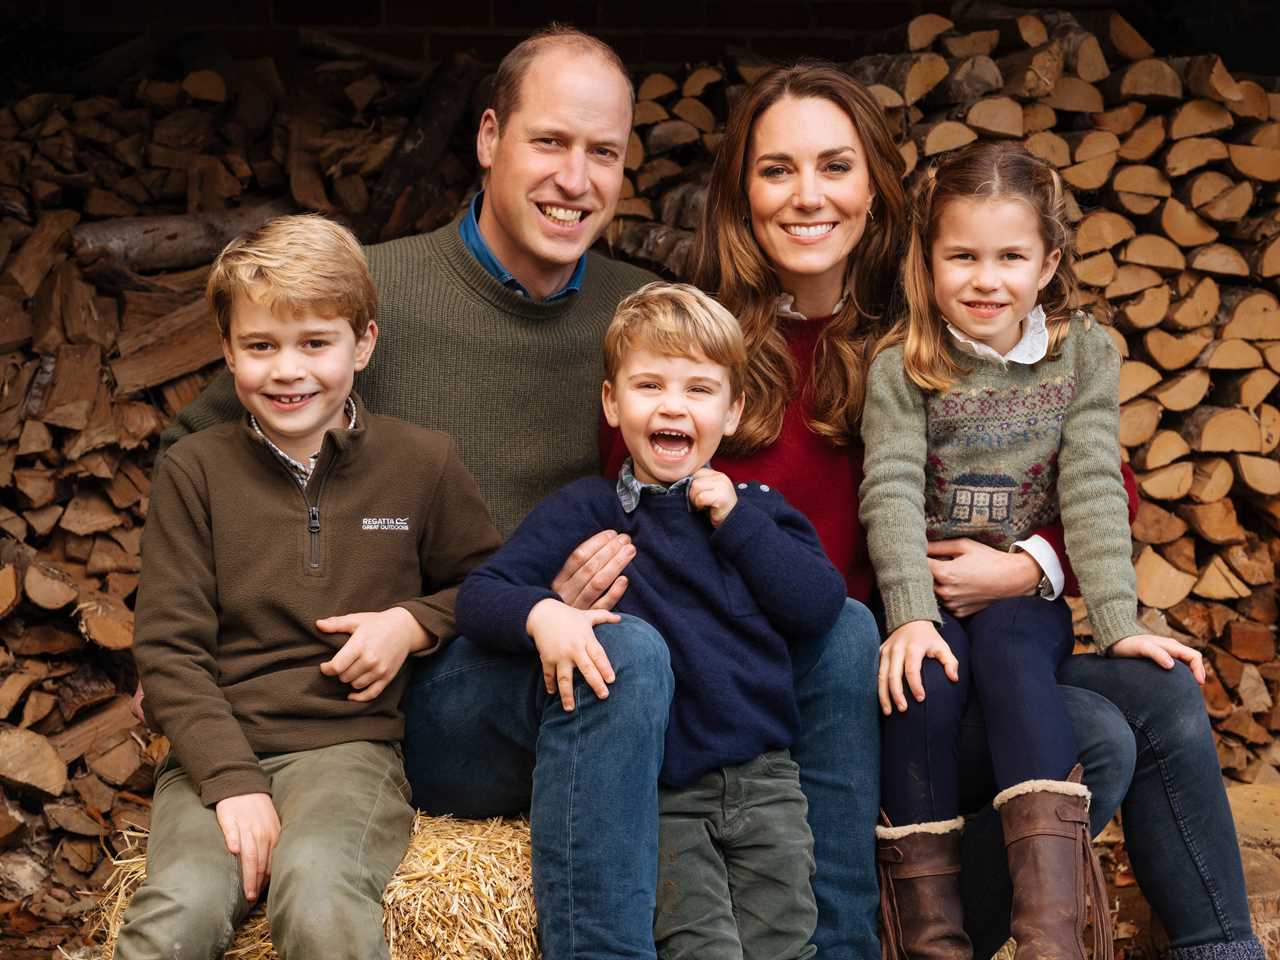 The Duke and Duchess of Cambridge have officially released their Christmas card, days after it was leaked online